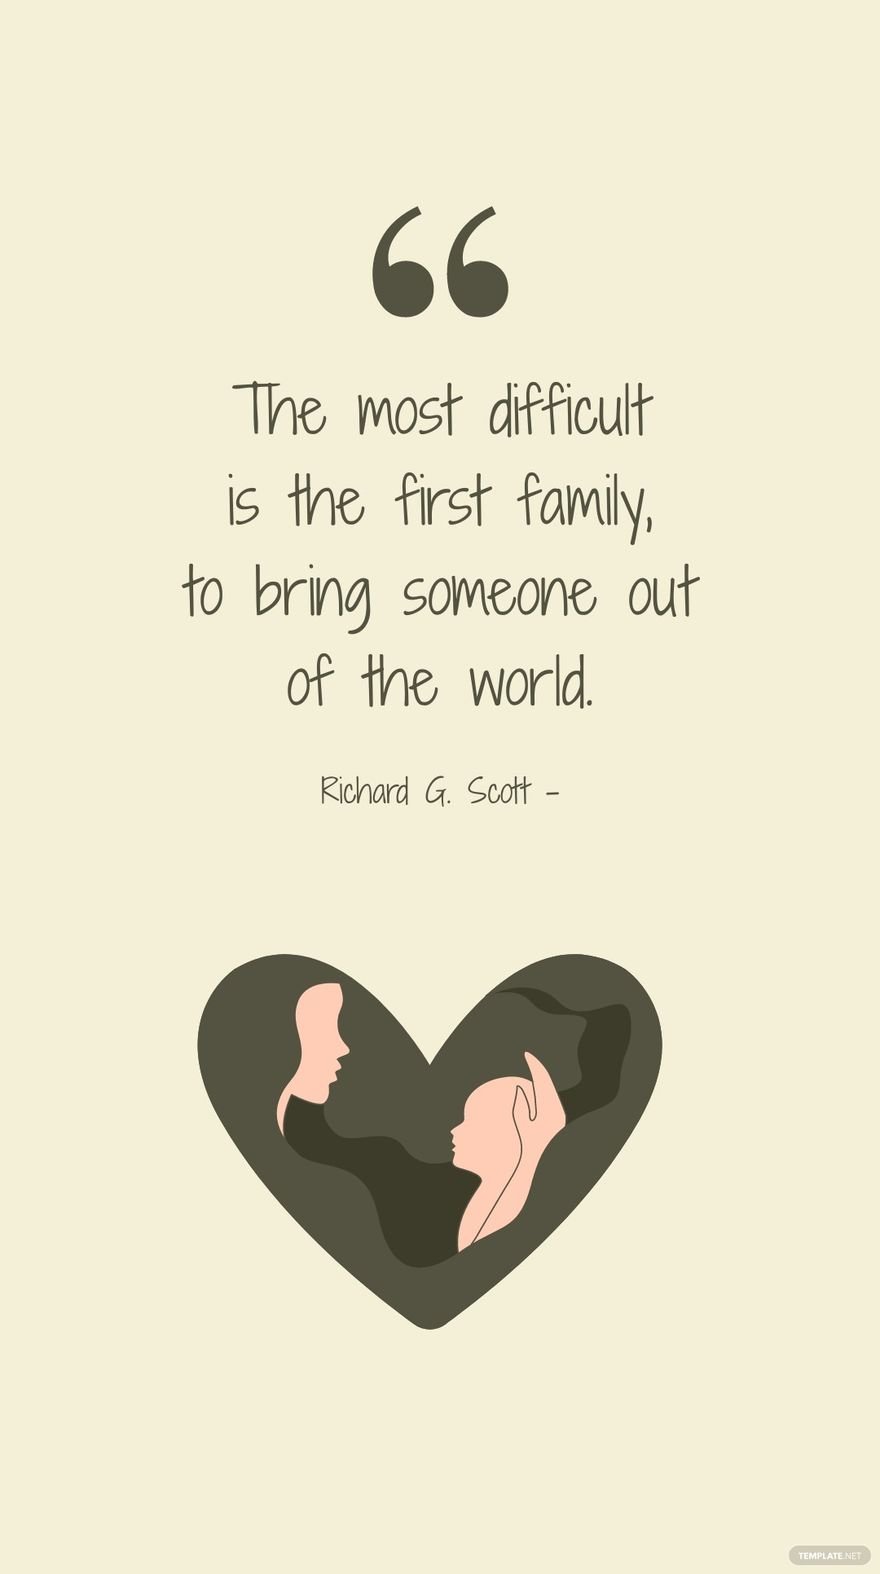 Free Richard G. Scott - The most difficult is the first family, to bring someone out of the world.